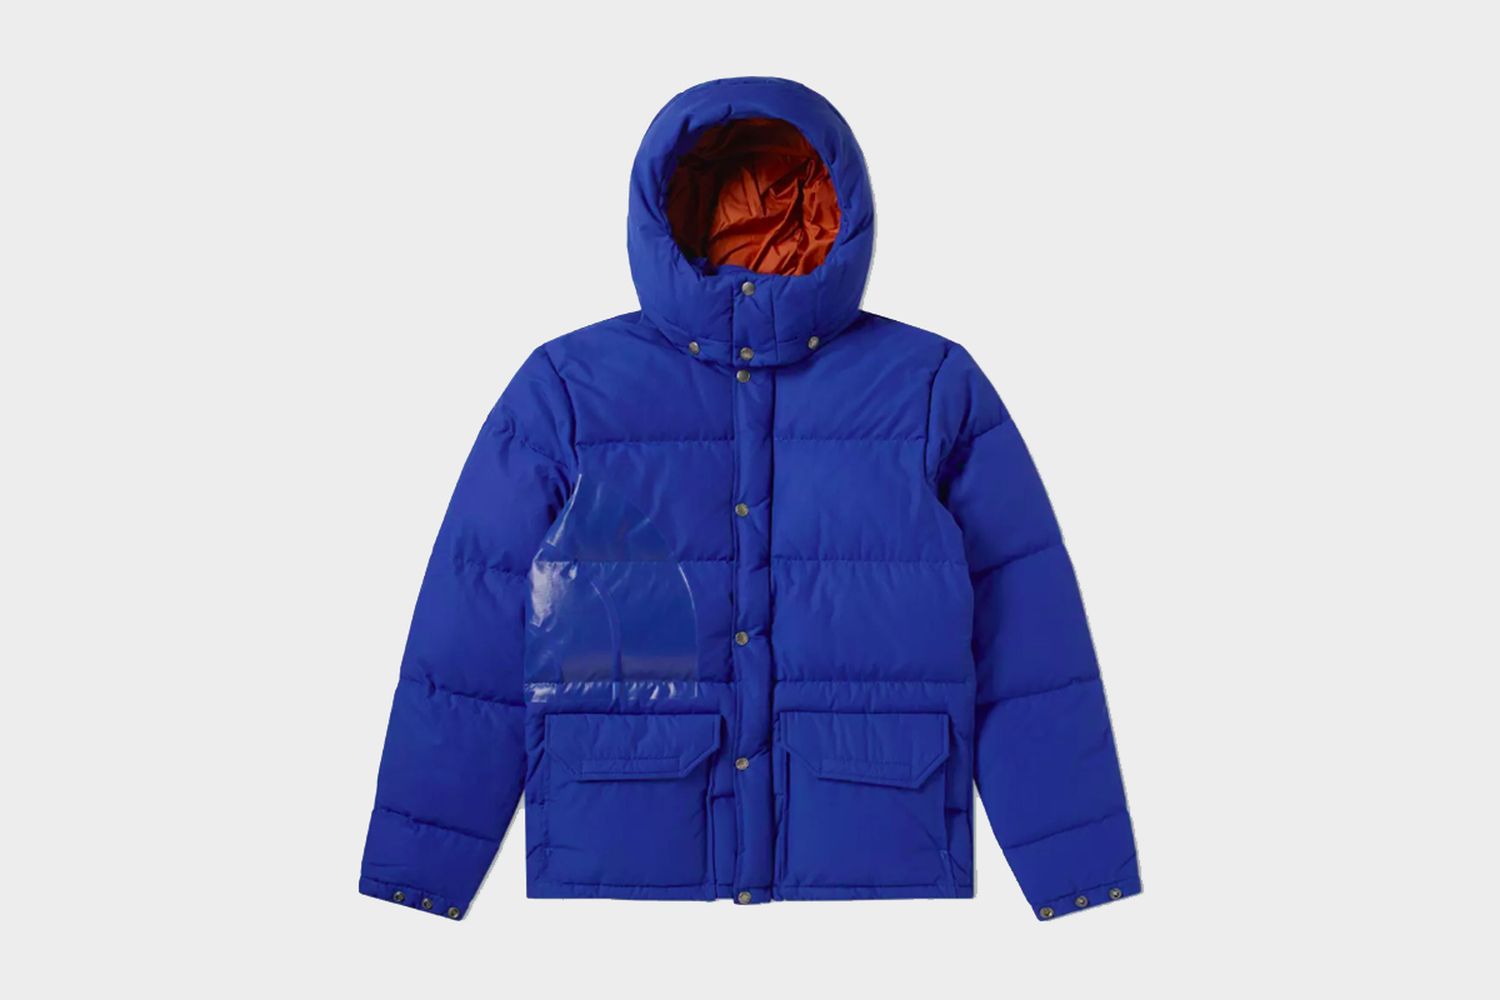 The North Face Just Dropped a New Baltro Light Jacket